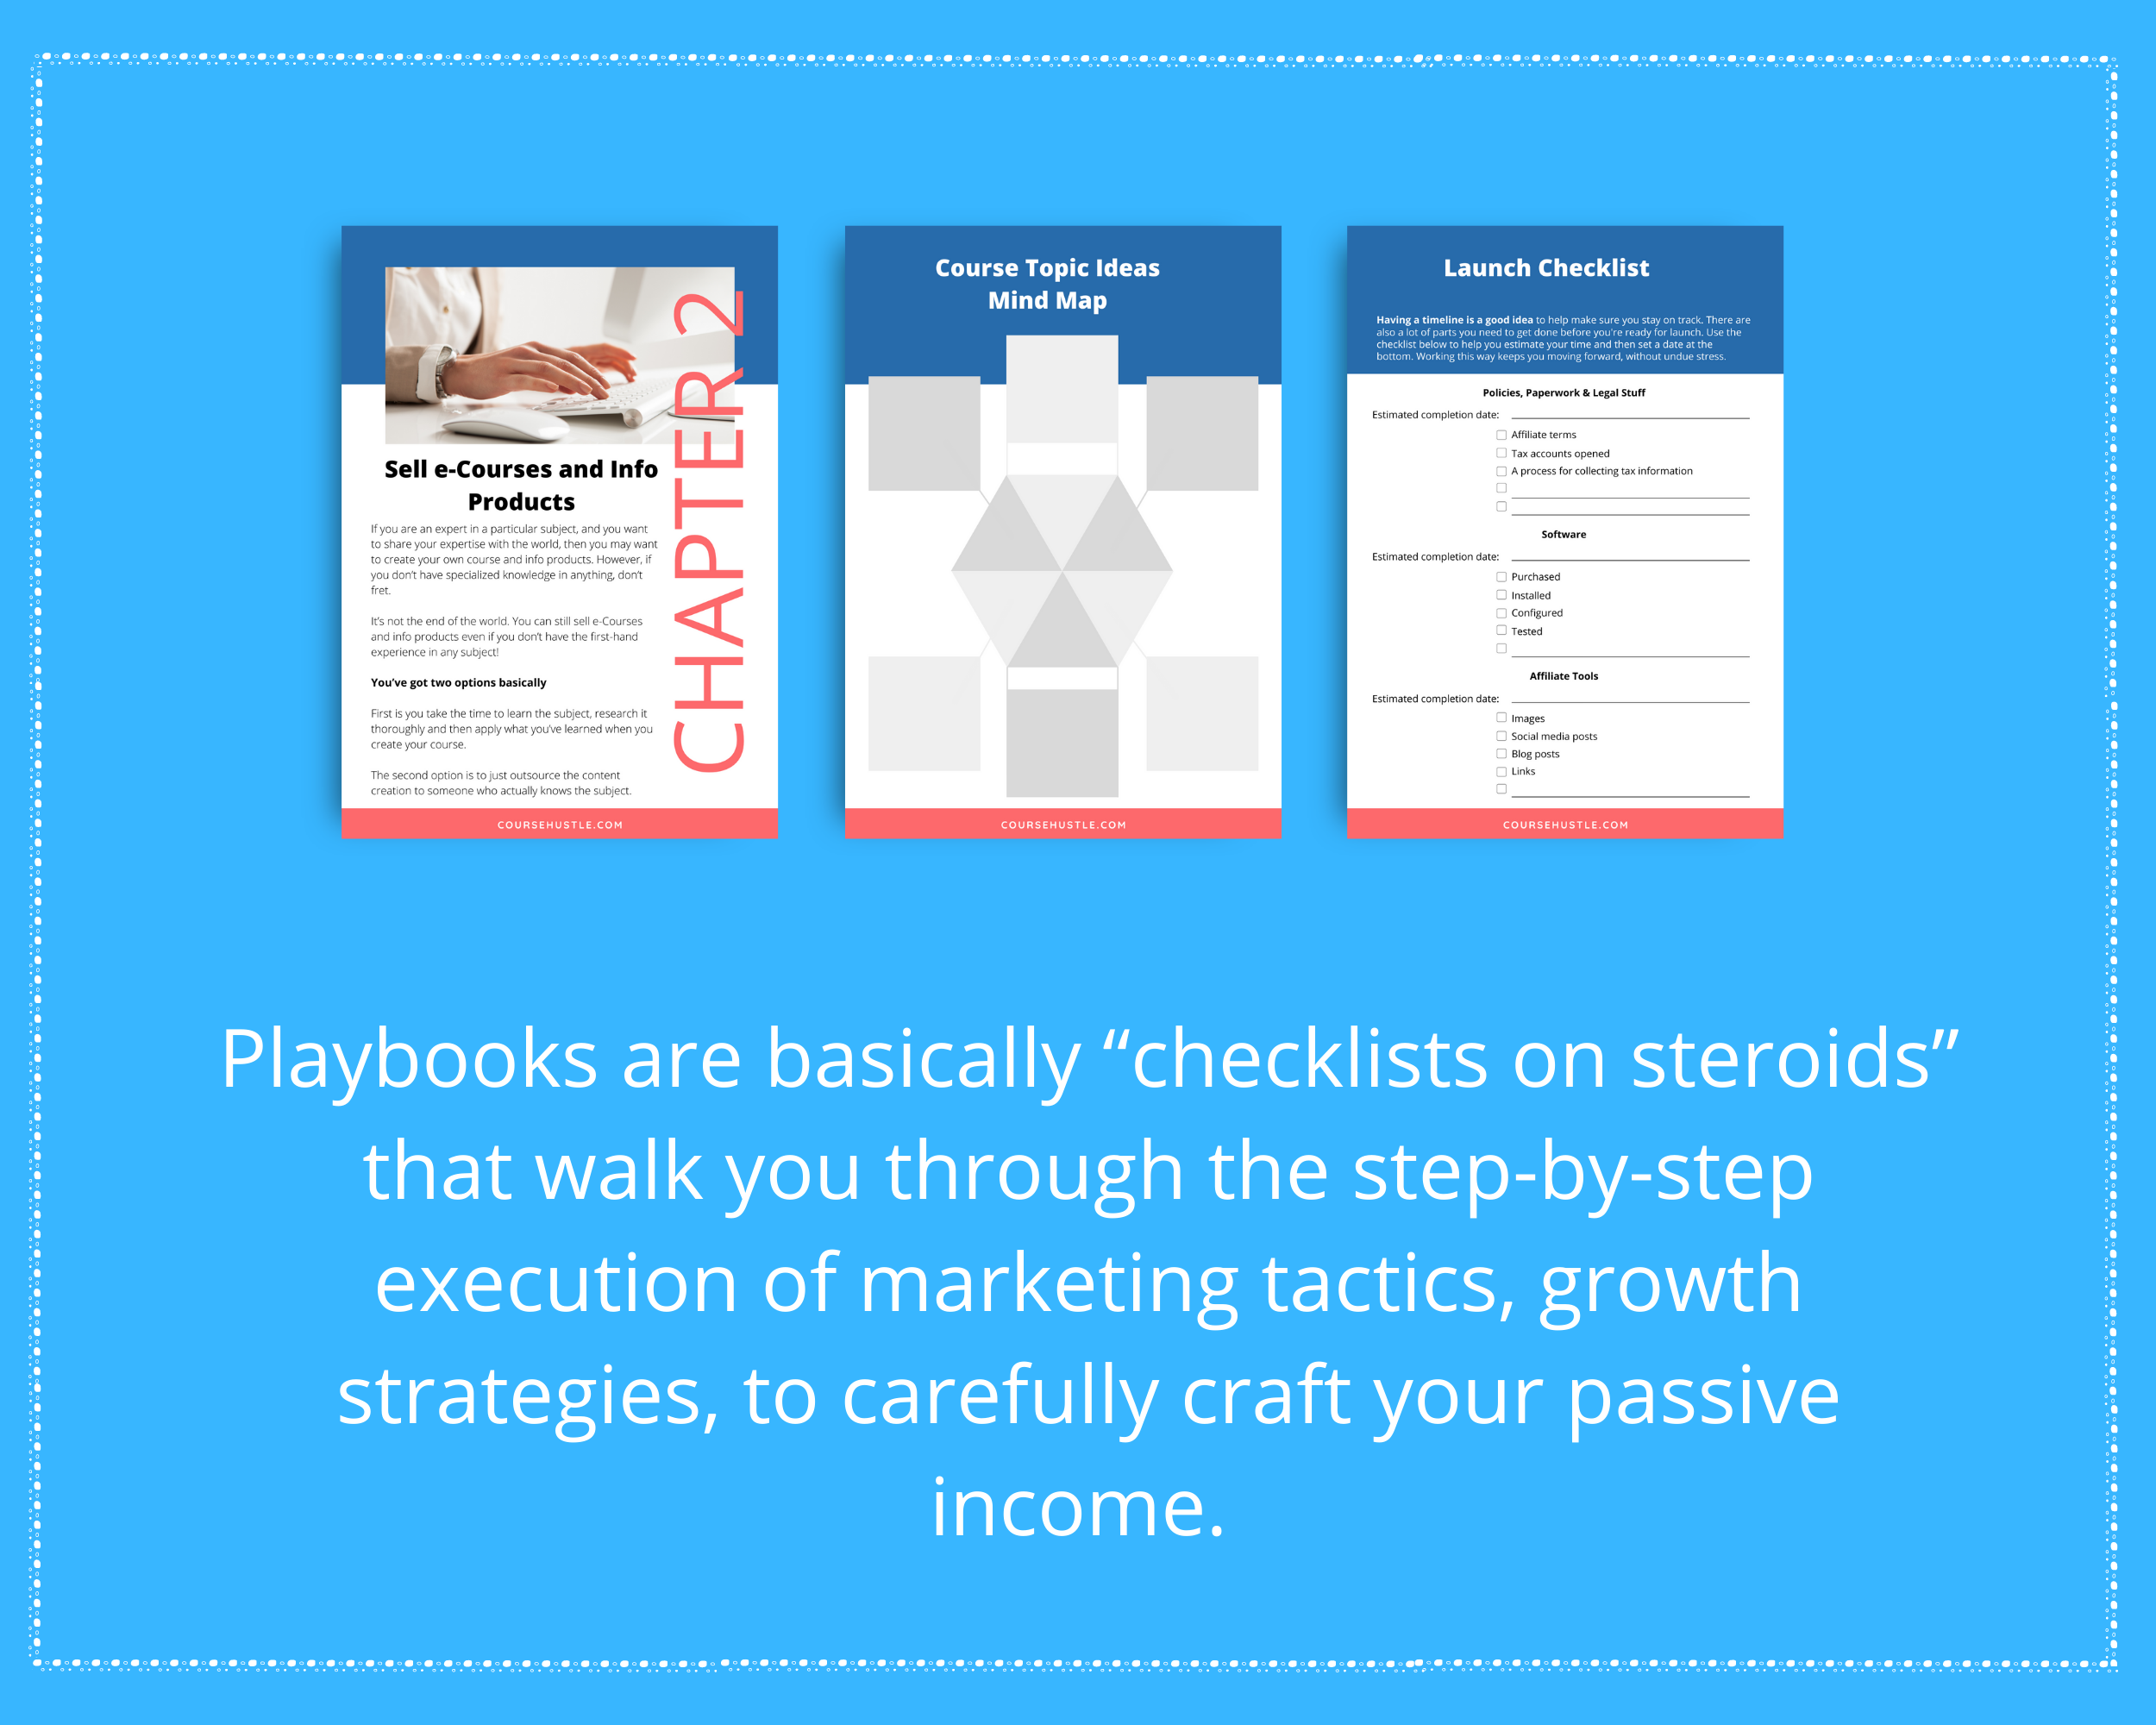 Done for You Passive Income Playbook in Canva | Editable A4 Size Canva Template